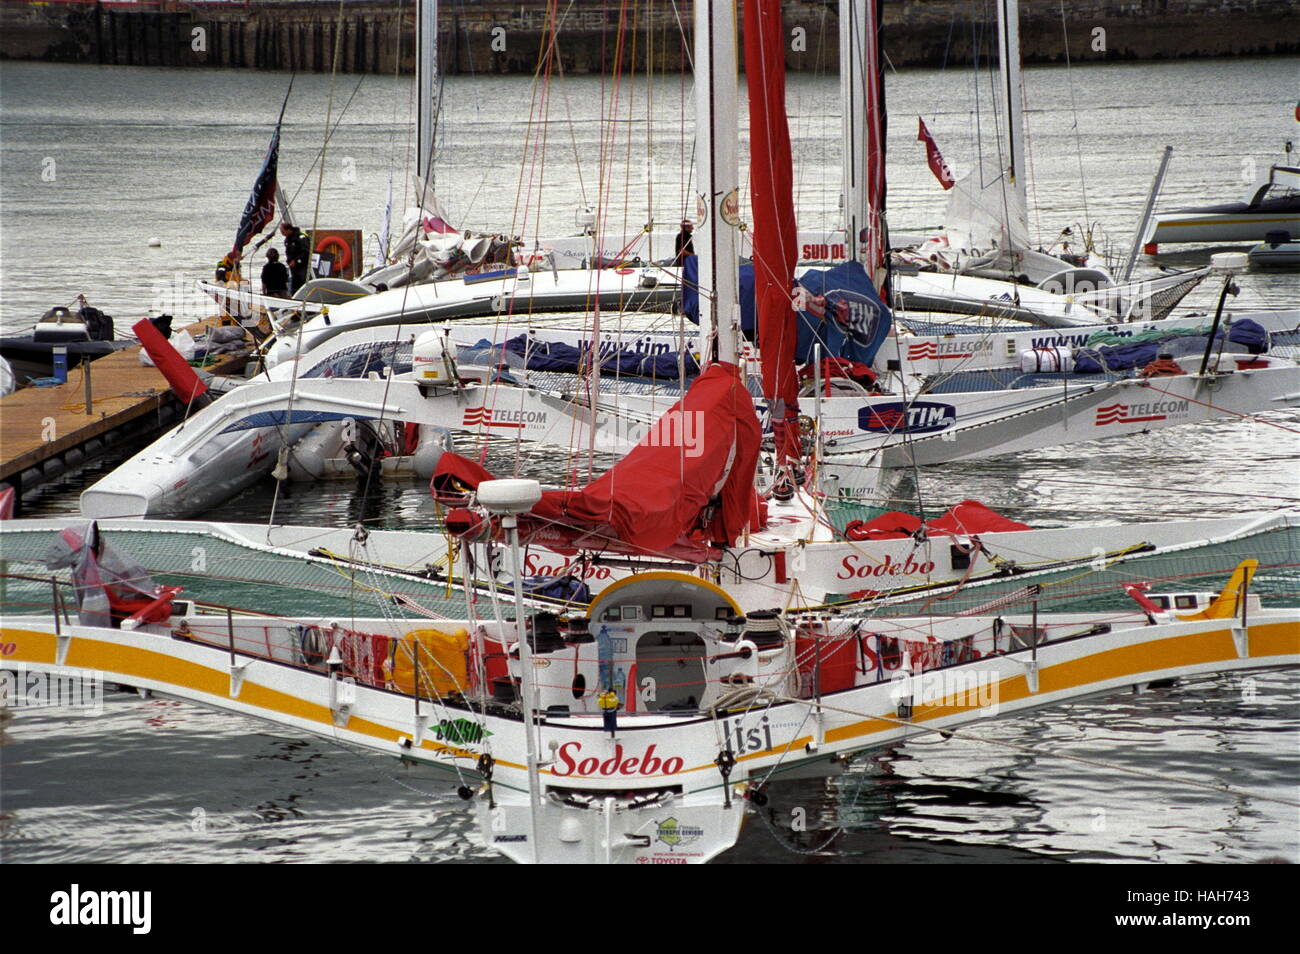 AJAX NEWS PHOTOS. 31ST MAY 2004. PLYMOUTH, ENGLAND. - TRANSAT YACHT RACE - MULTIHULLS MOORED IN QUEN ANNE'S BATTERY MARINA BEFORE THE START. PHOTO:JONATHAN EASTLAND/AJAX  REF:43105 3 Stock Photo